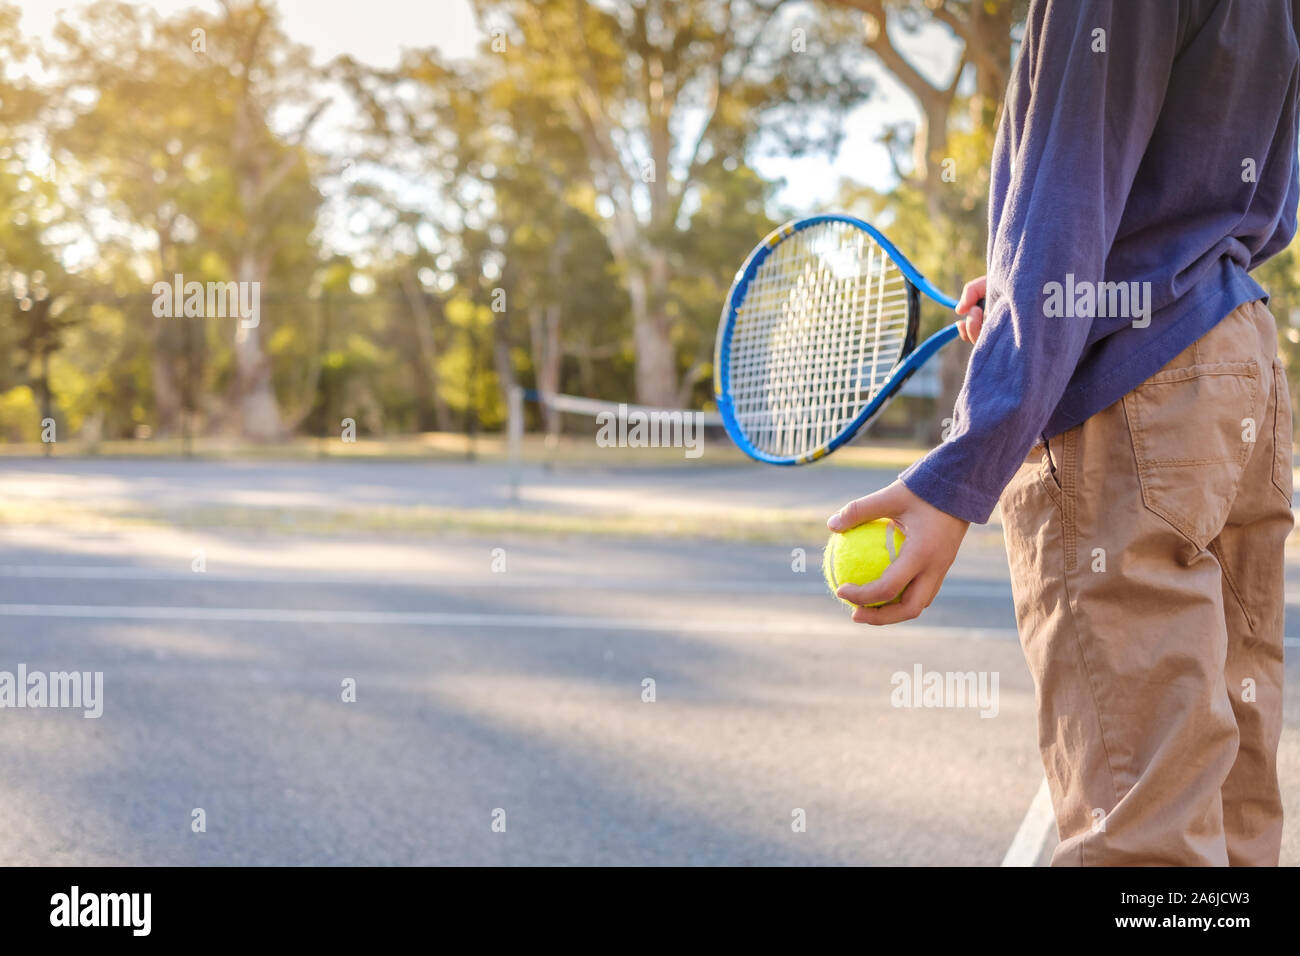 Australian Boy Holding Tennis Racket And Ball At Outdoor Court In South Australia Stock Photo Alamy